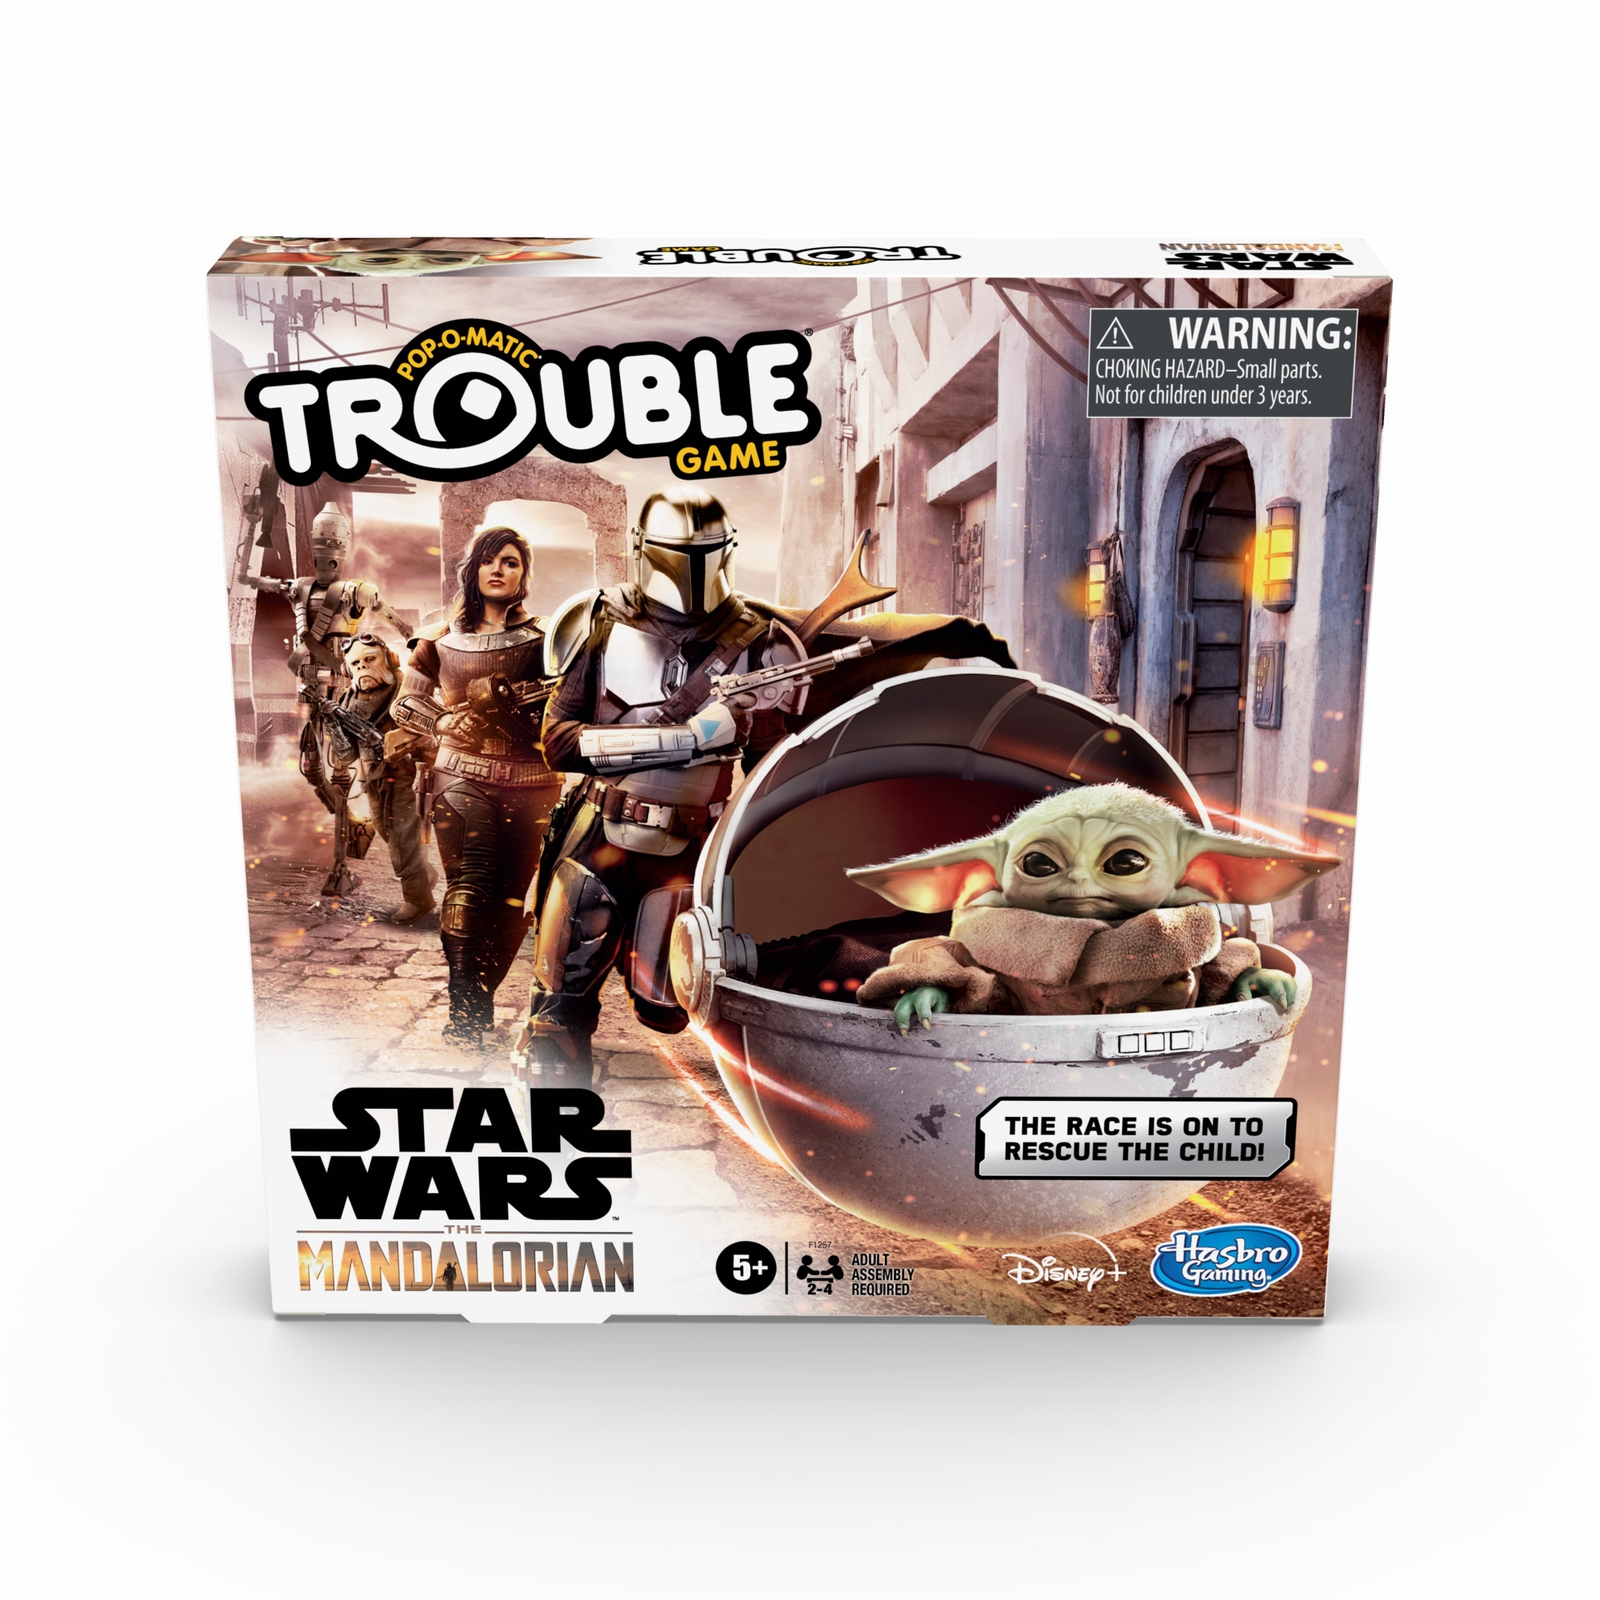 TROUBLE-STAR-WARS-THE-MANDALORIAN-EDITION-Game-in-pck-2.jpg